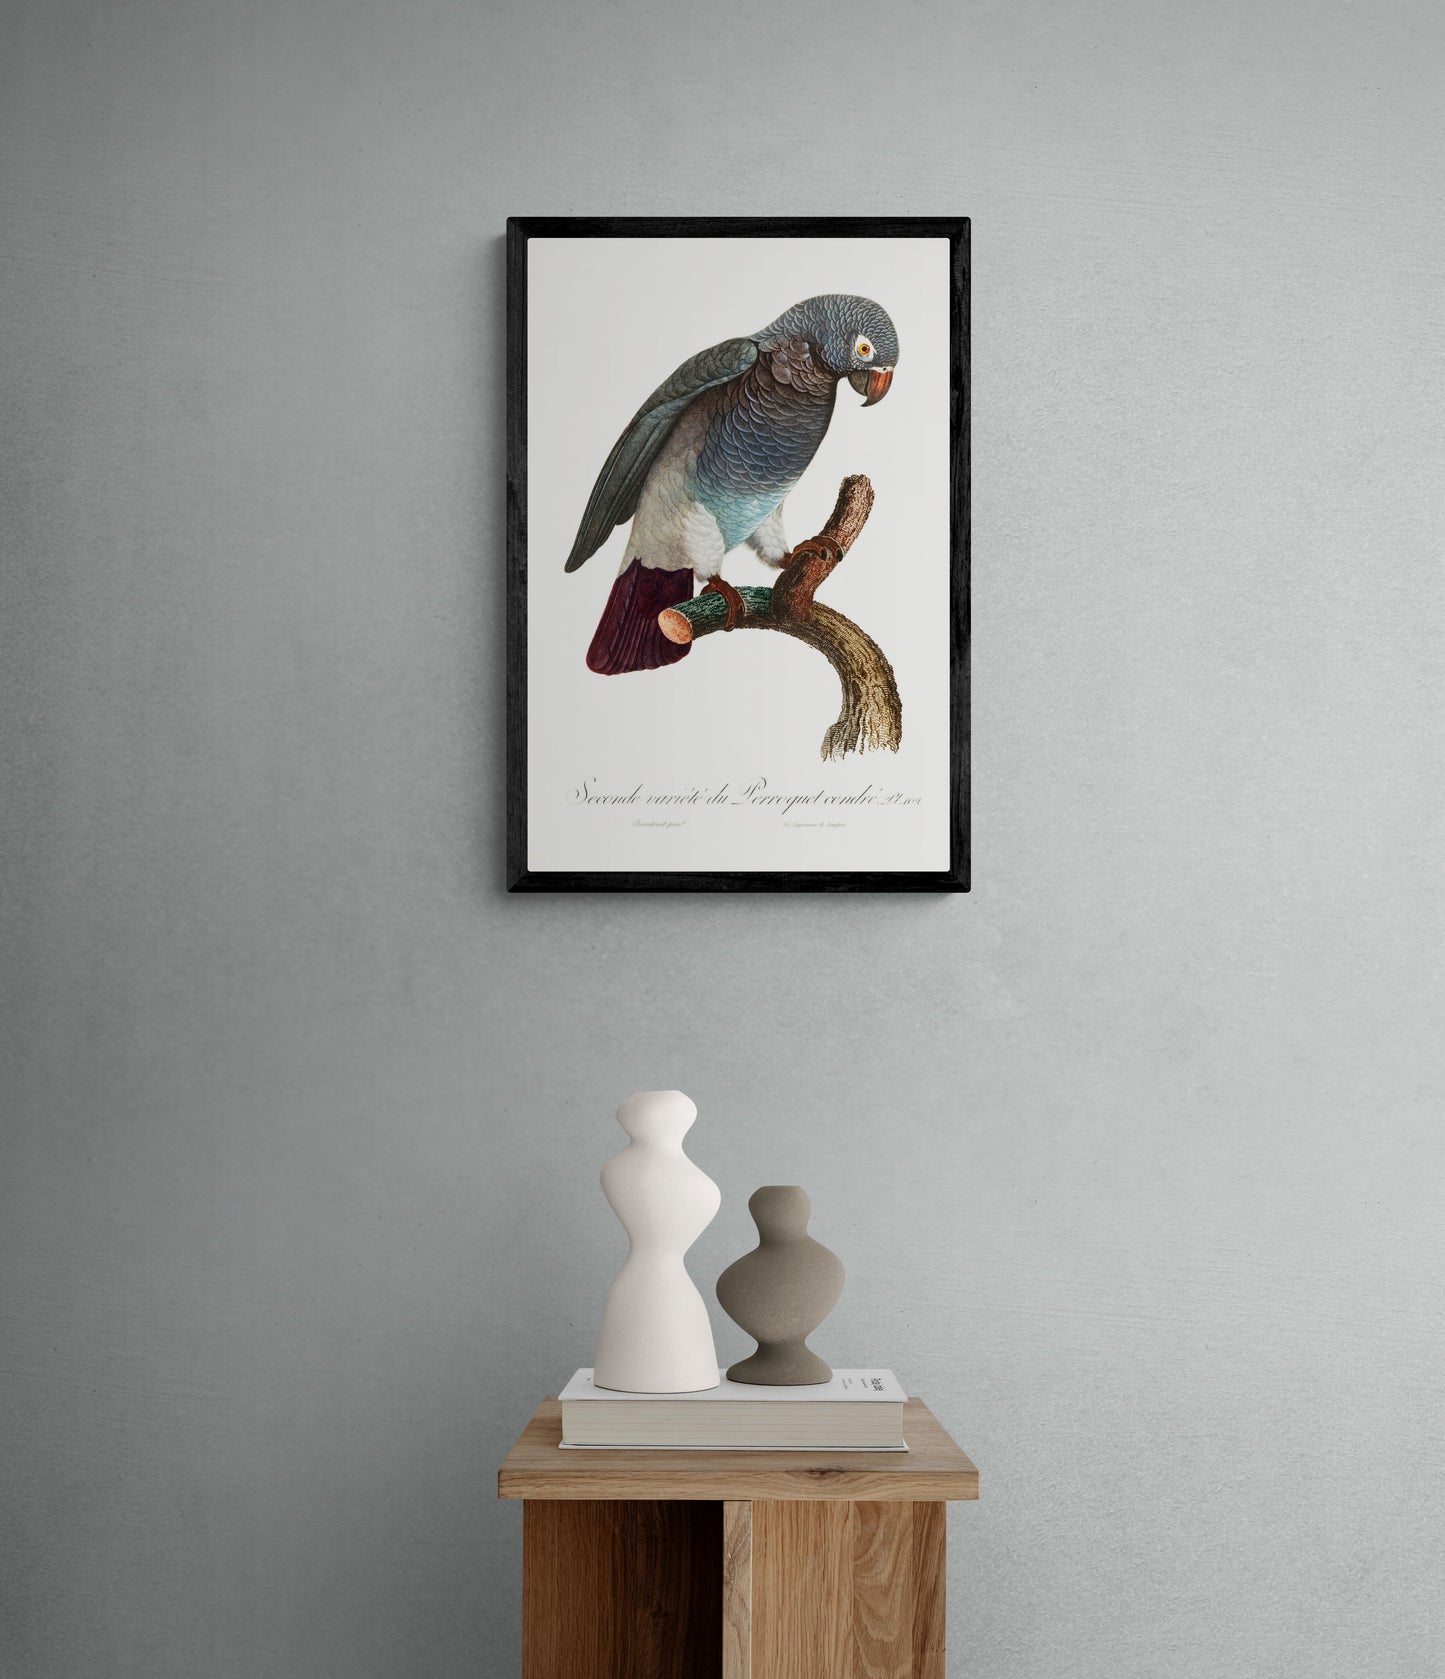 Vintage naturalistic The Grey Parrot, Psittacus erithacus illustrations. Prints on art paper, canvas and framed canvas. Free shipping in the USA.